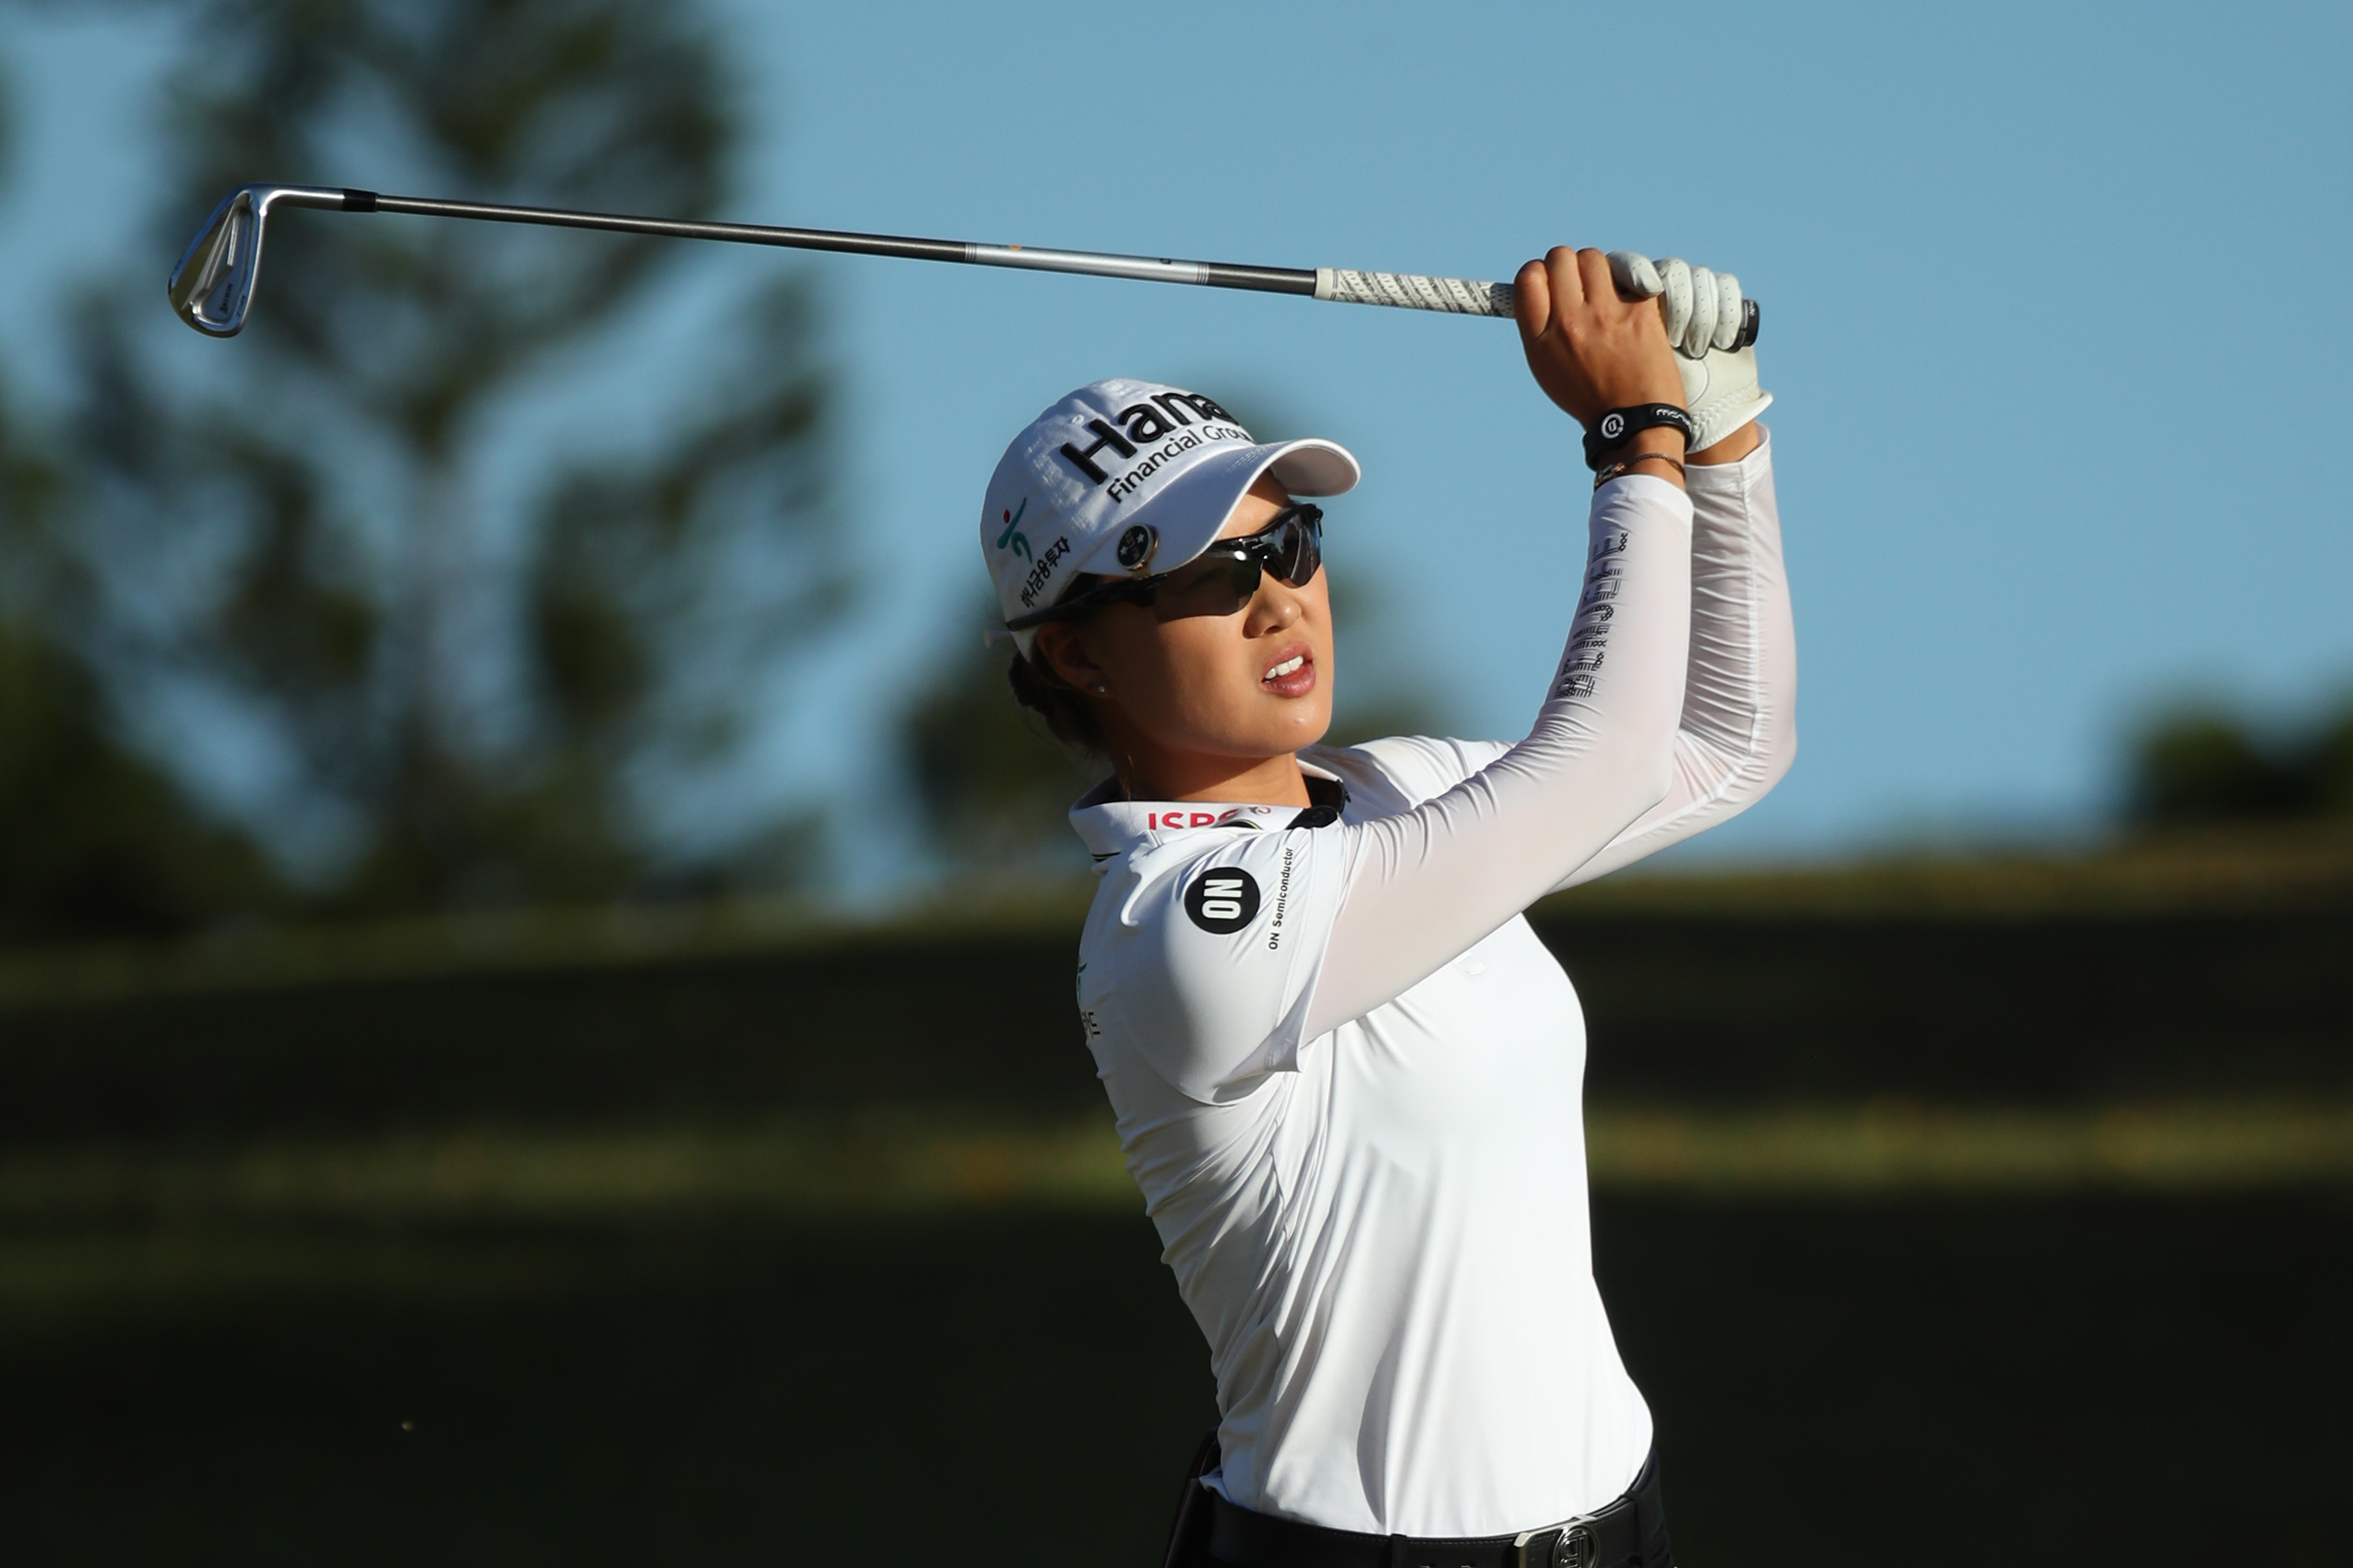 The clubs Minjee Lee used to win the Hugel-Air Premia LA Open | Golf  Equipment: Clubs, Balls, Bags | Golf Digest